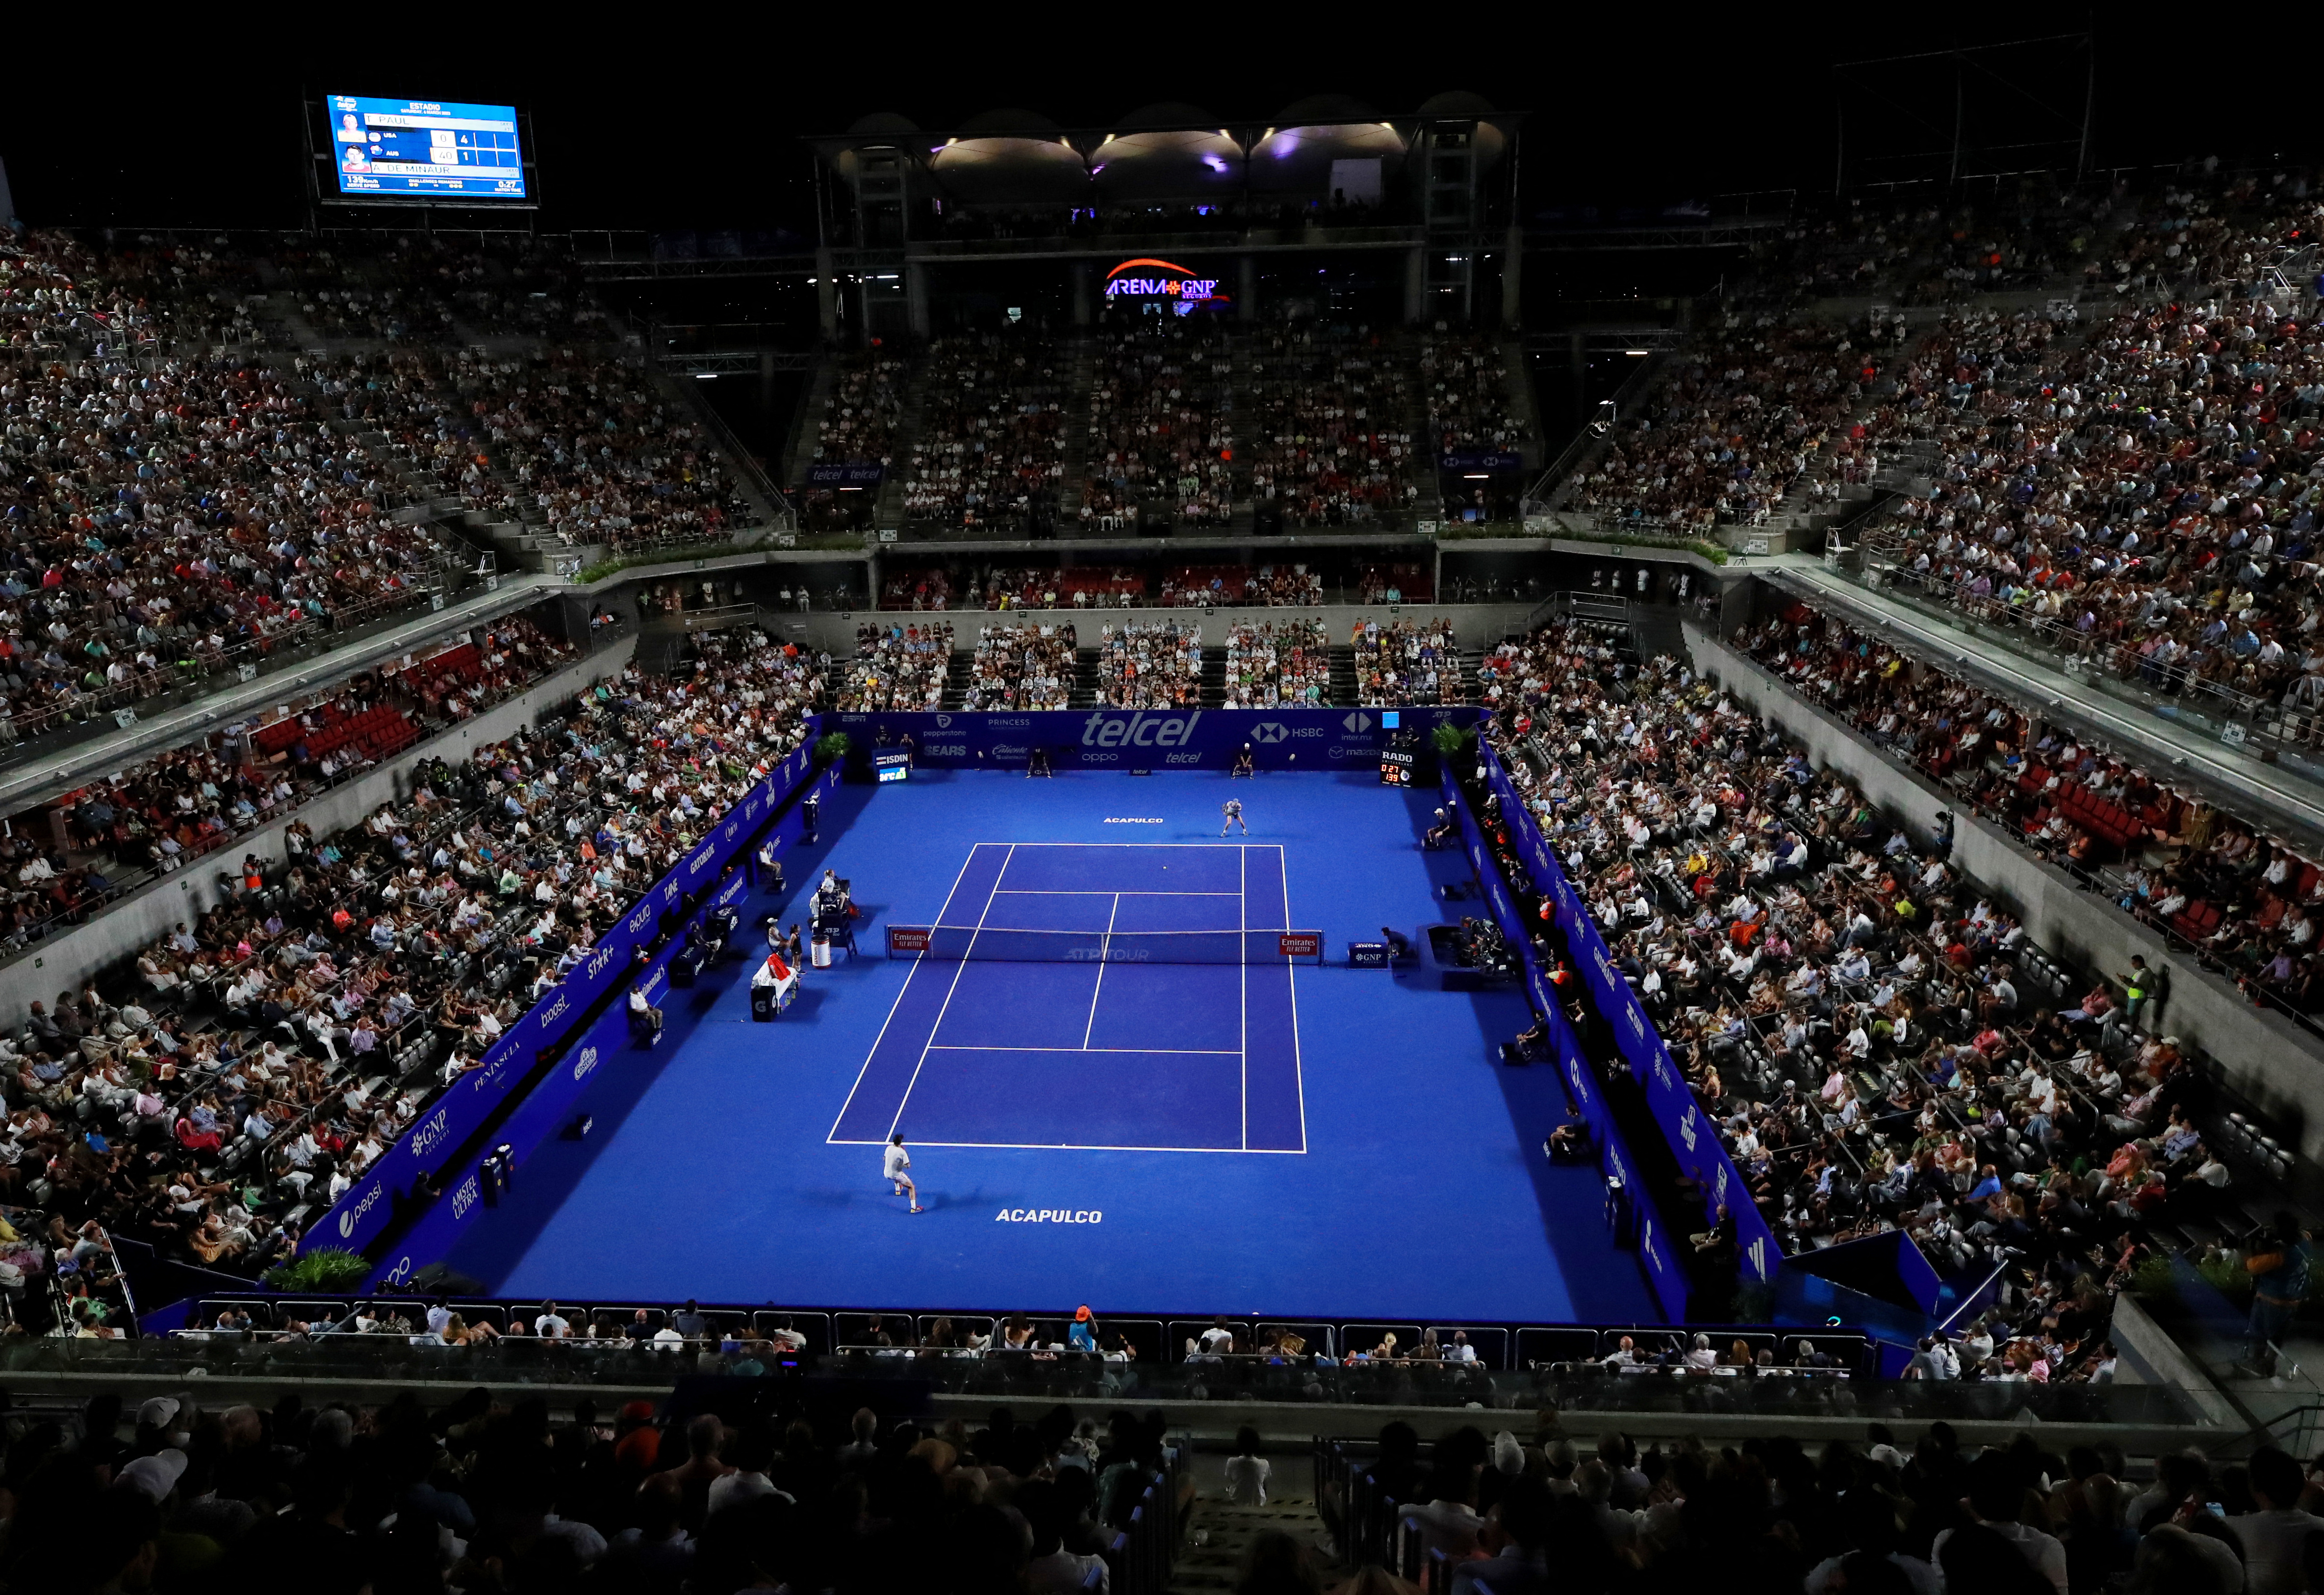 ATP Tour – Wednesday, Oct. 27, 2021 results – Open Court